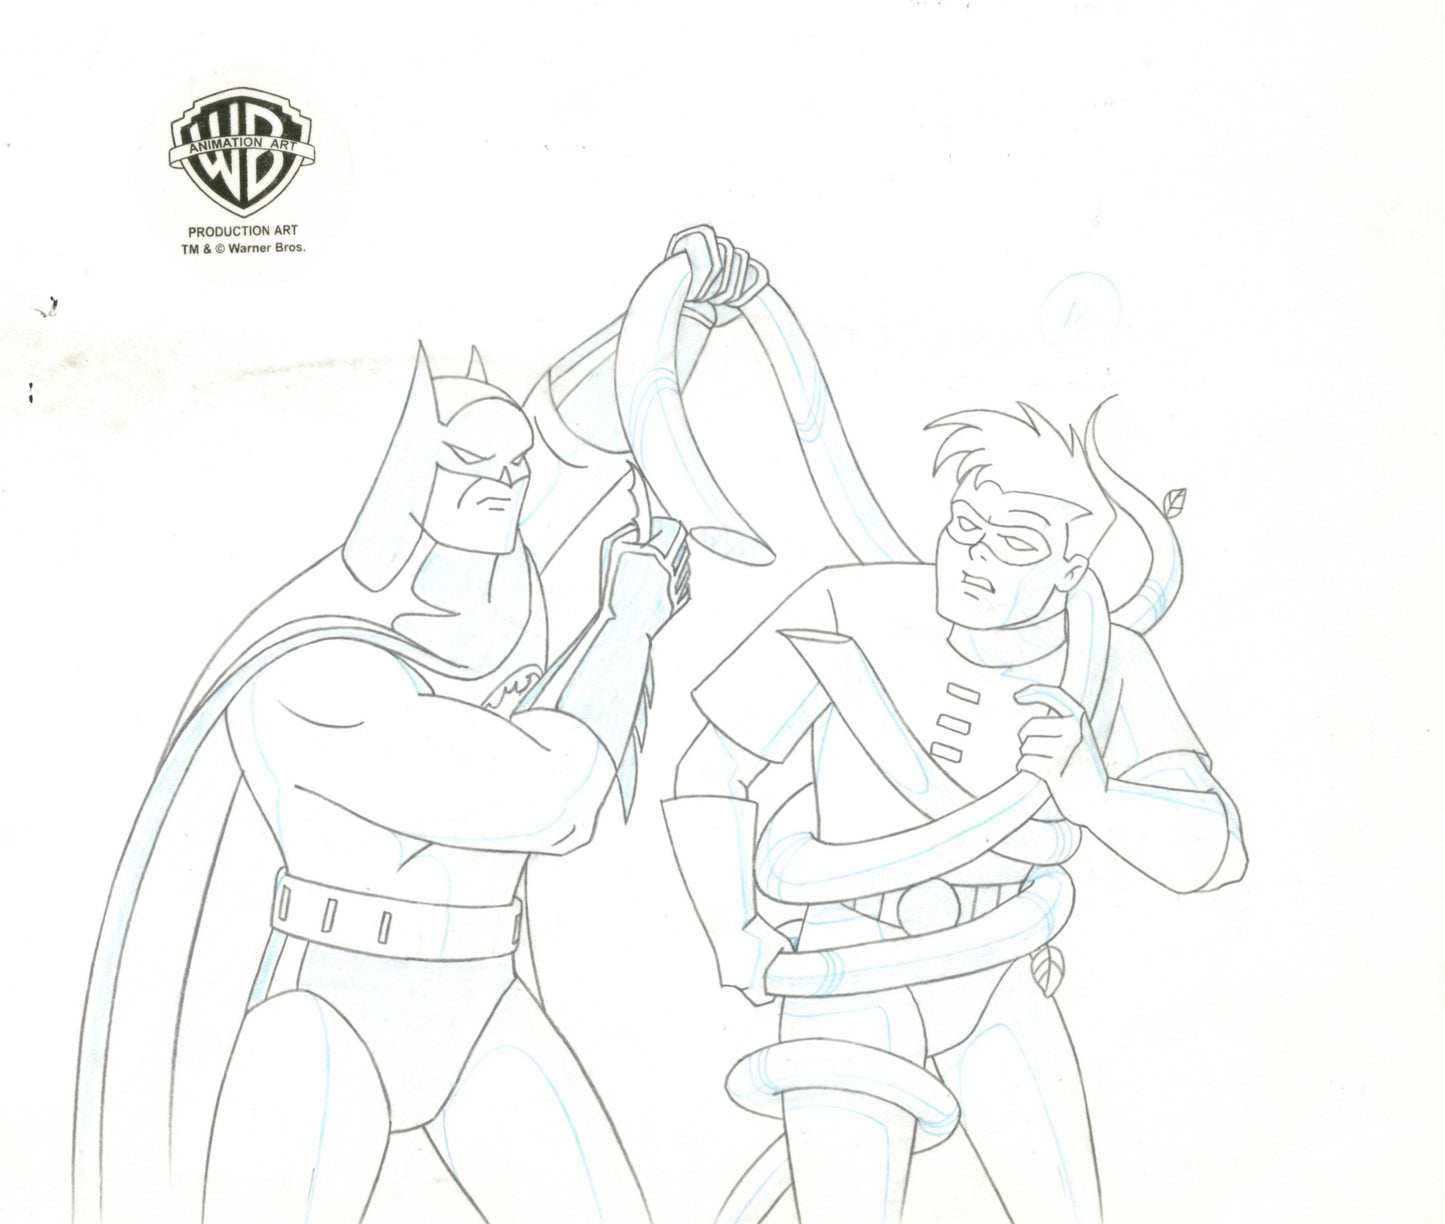 Batman The Animated Series Original Production Cel with Matching Drawing signed by Bruce Timm: Batman, Robin